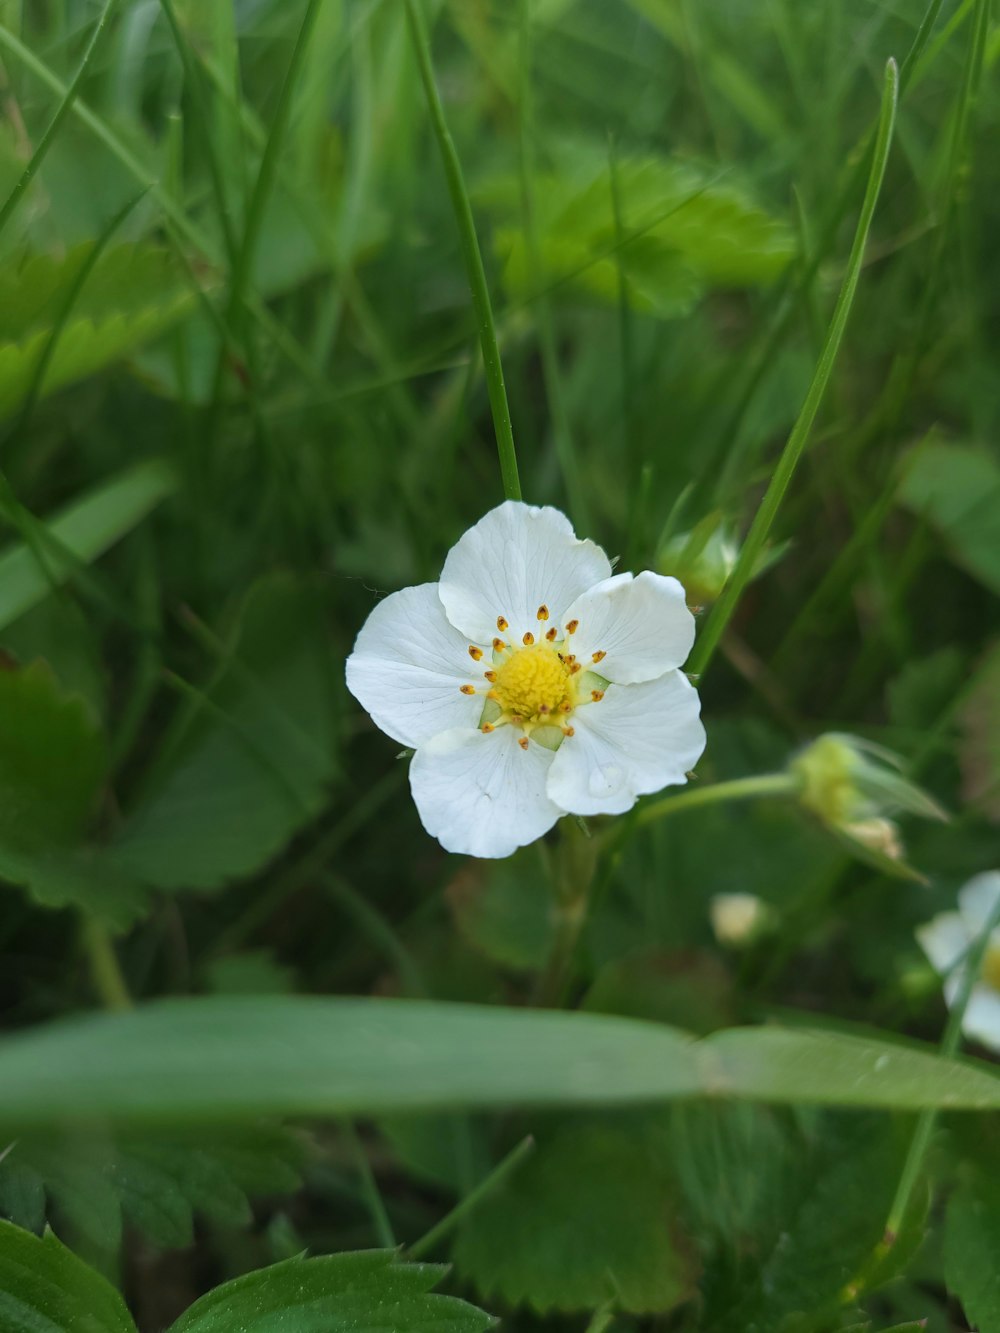 a white flower with a yellow center surrounded by green grass